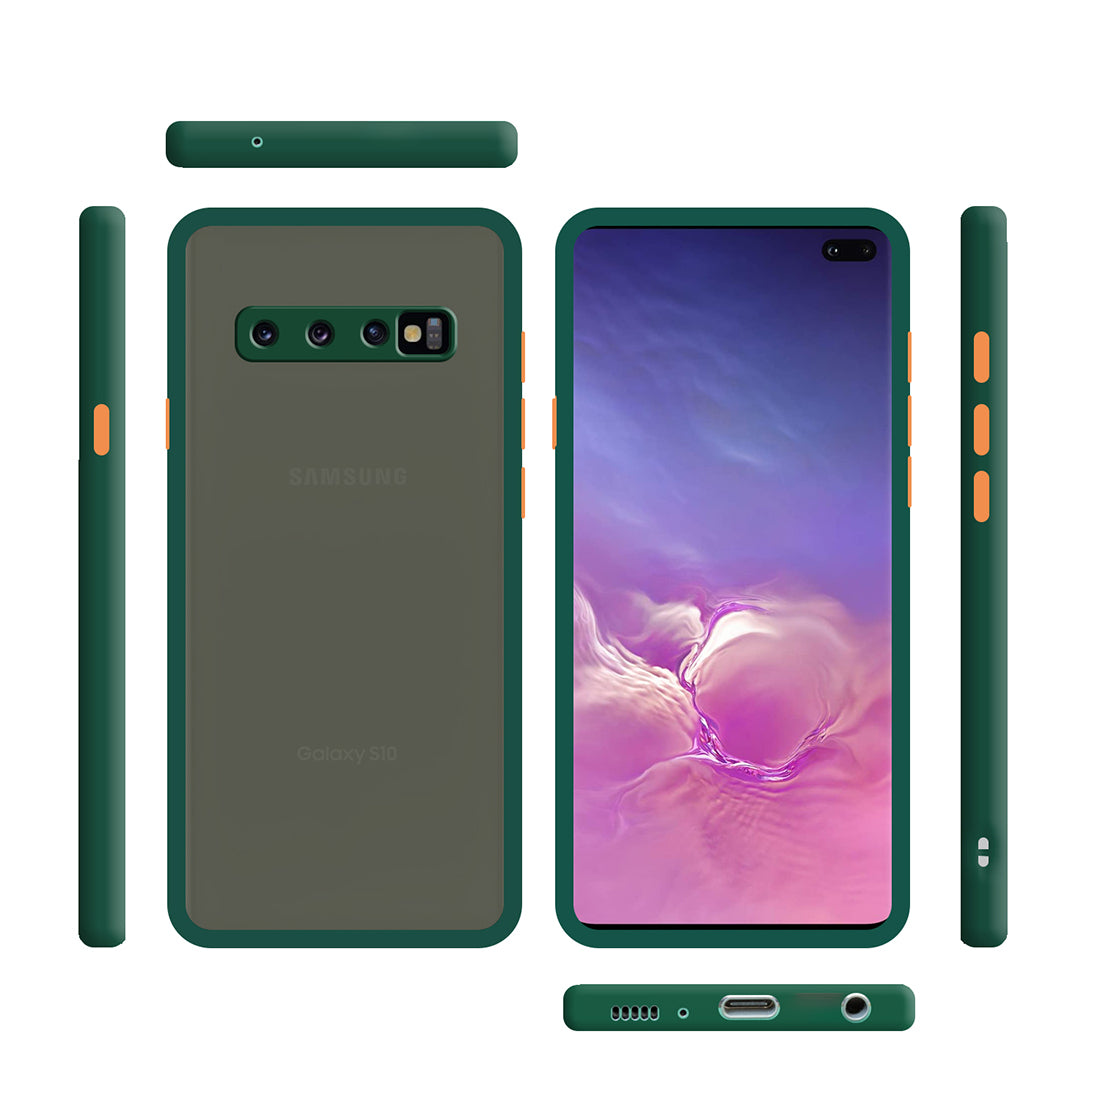 Smoke Back Case Cover for Samsung Galaxy S10 4G